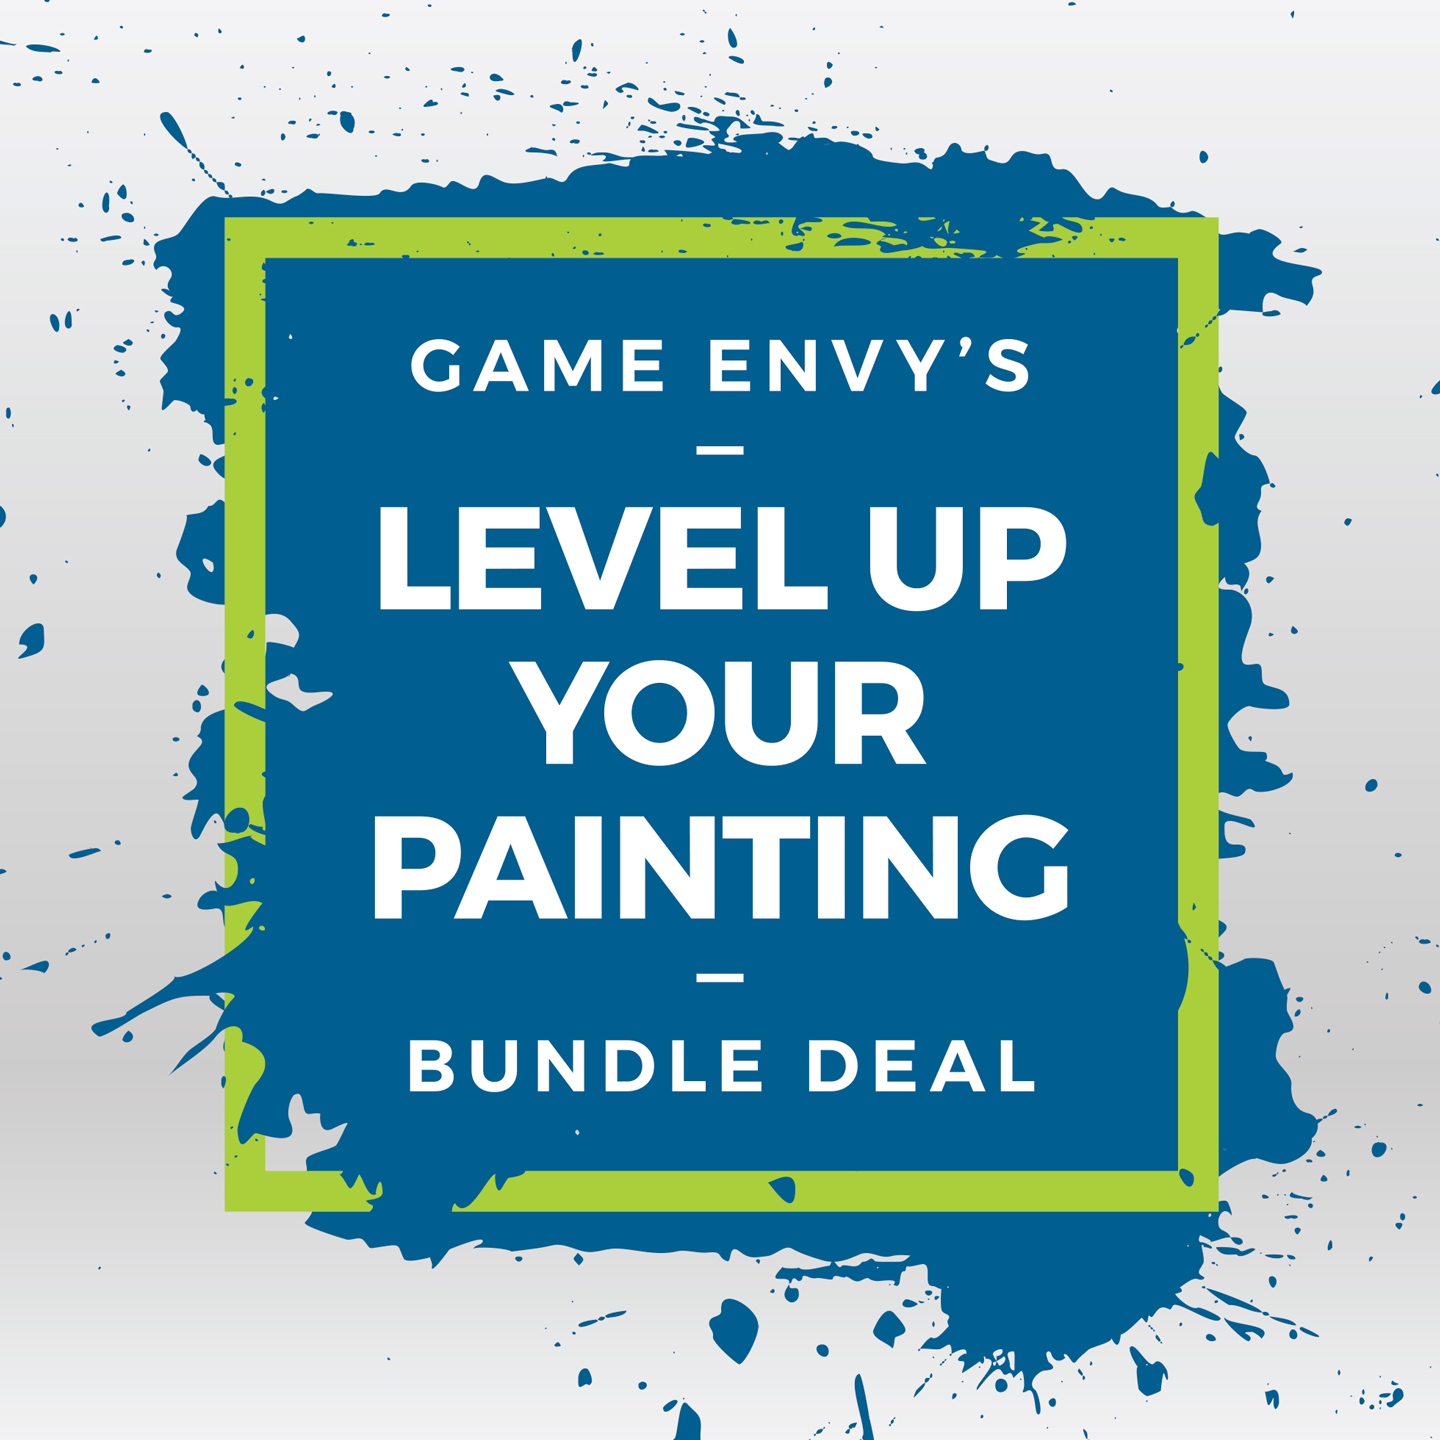 Paint Your Minis Faster With Game Envy!